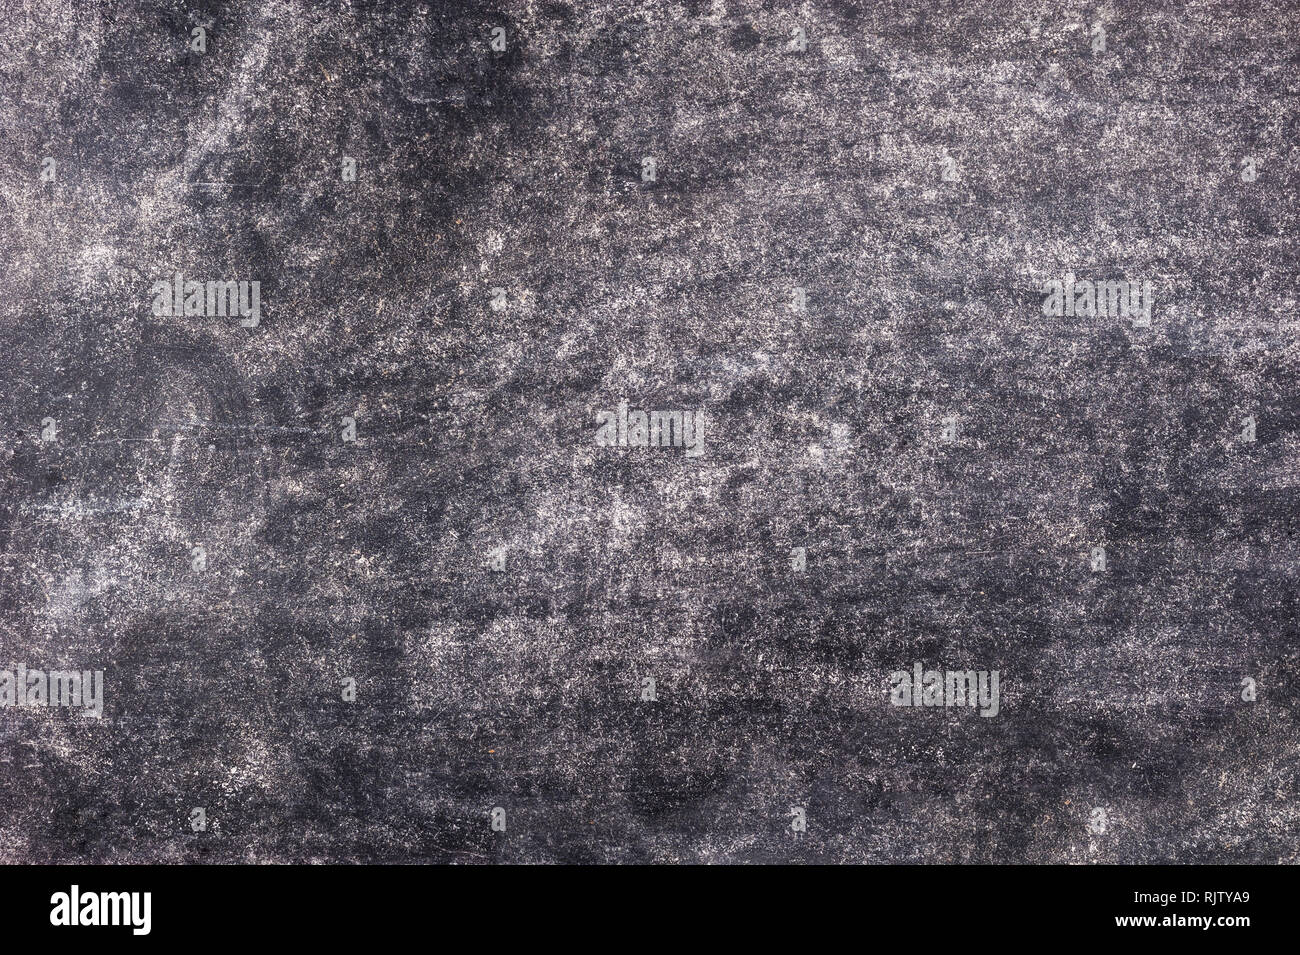 Black  texture template on white background.Grey wall grunge elements with grain and scratches. Beautiful texture for card, poster, invitation. Stock Photo